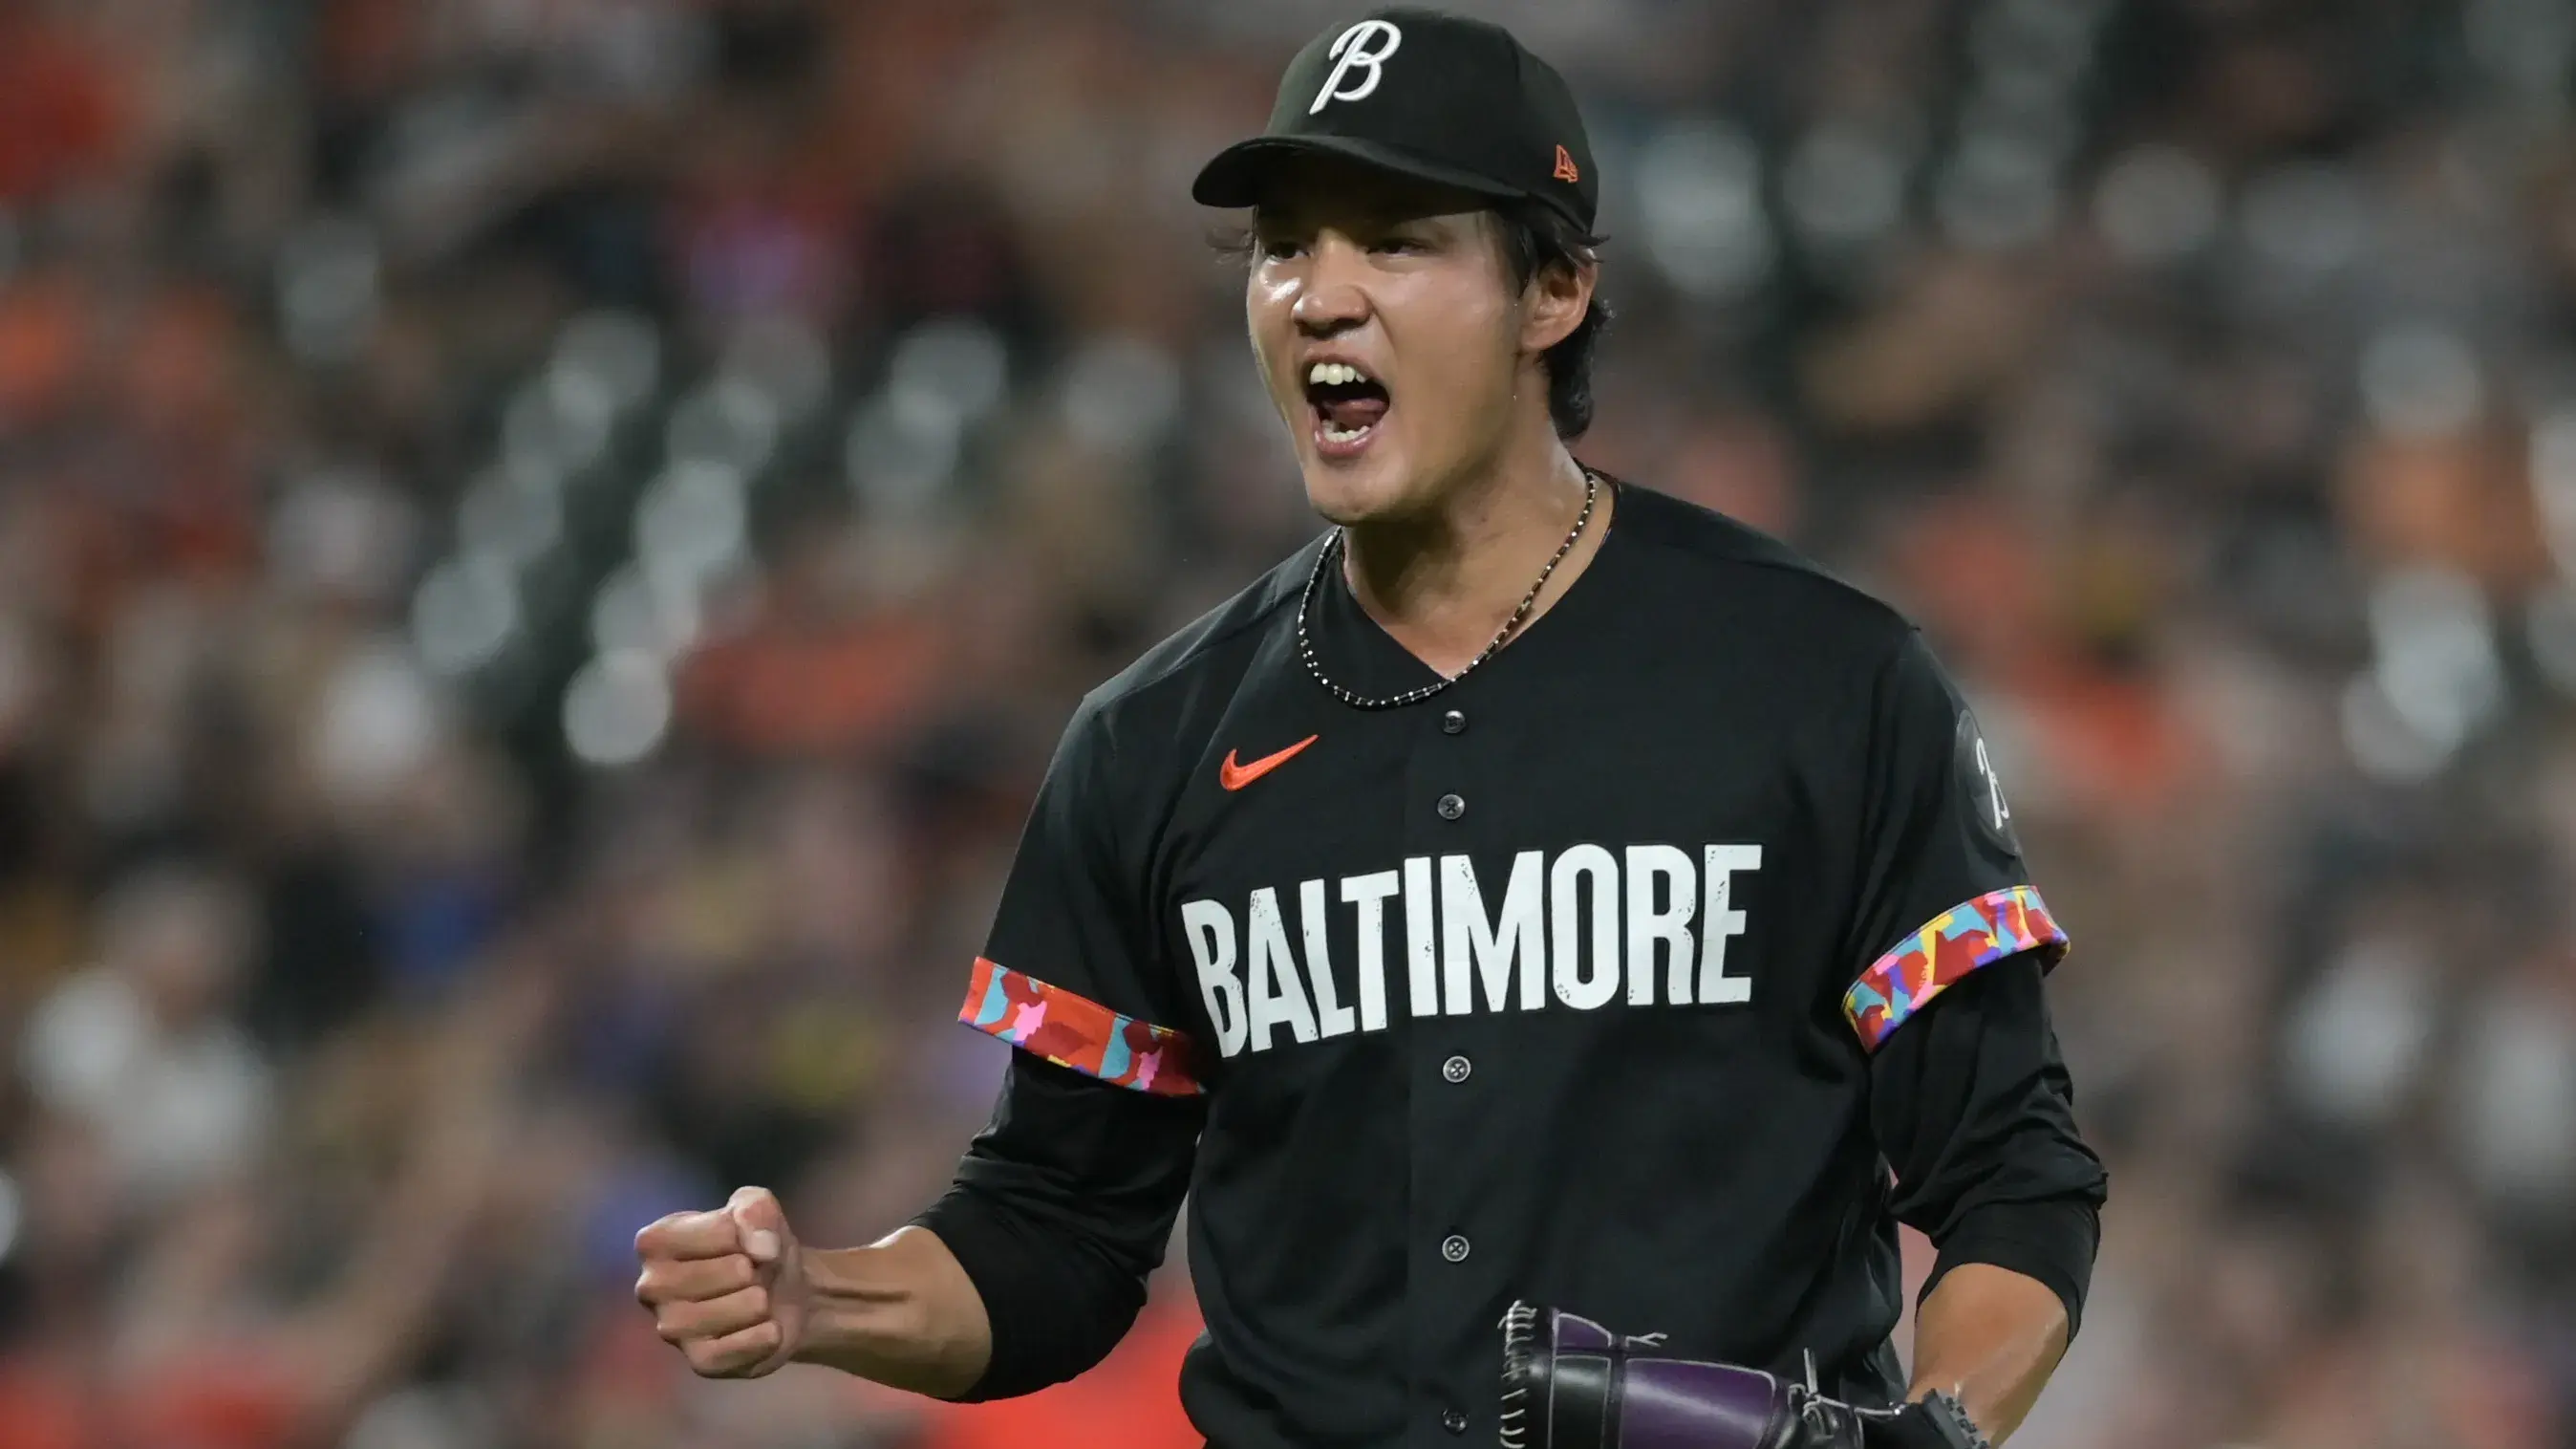 Baltimore Orioles relief pitcher Shintaro Fujinami (14) reacts after the final out of the eighth inning against the Colorado Rockies at Oriole Park at Camden Yards / Tommy Gilligan - USA TODAY Sports